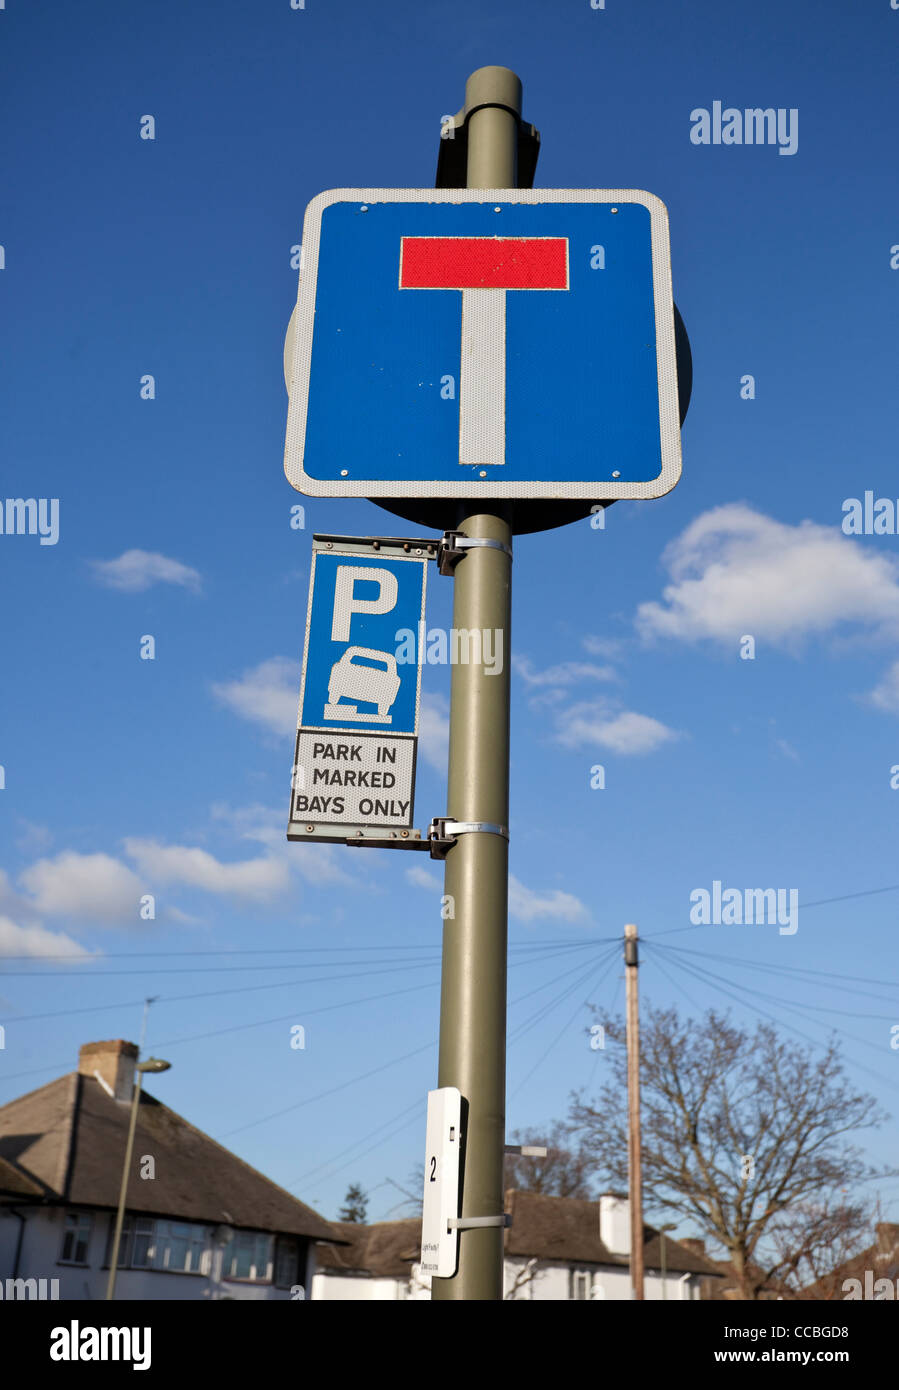 No through road for vehicles upright traffic sign, England, UK Stock Photo